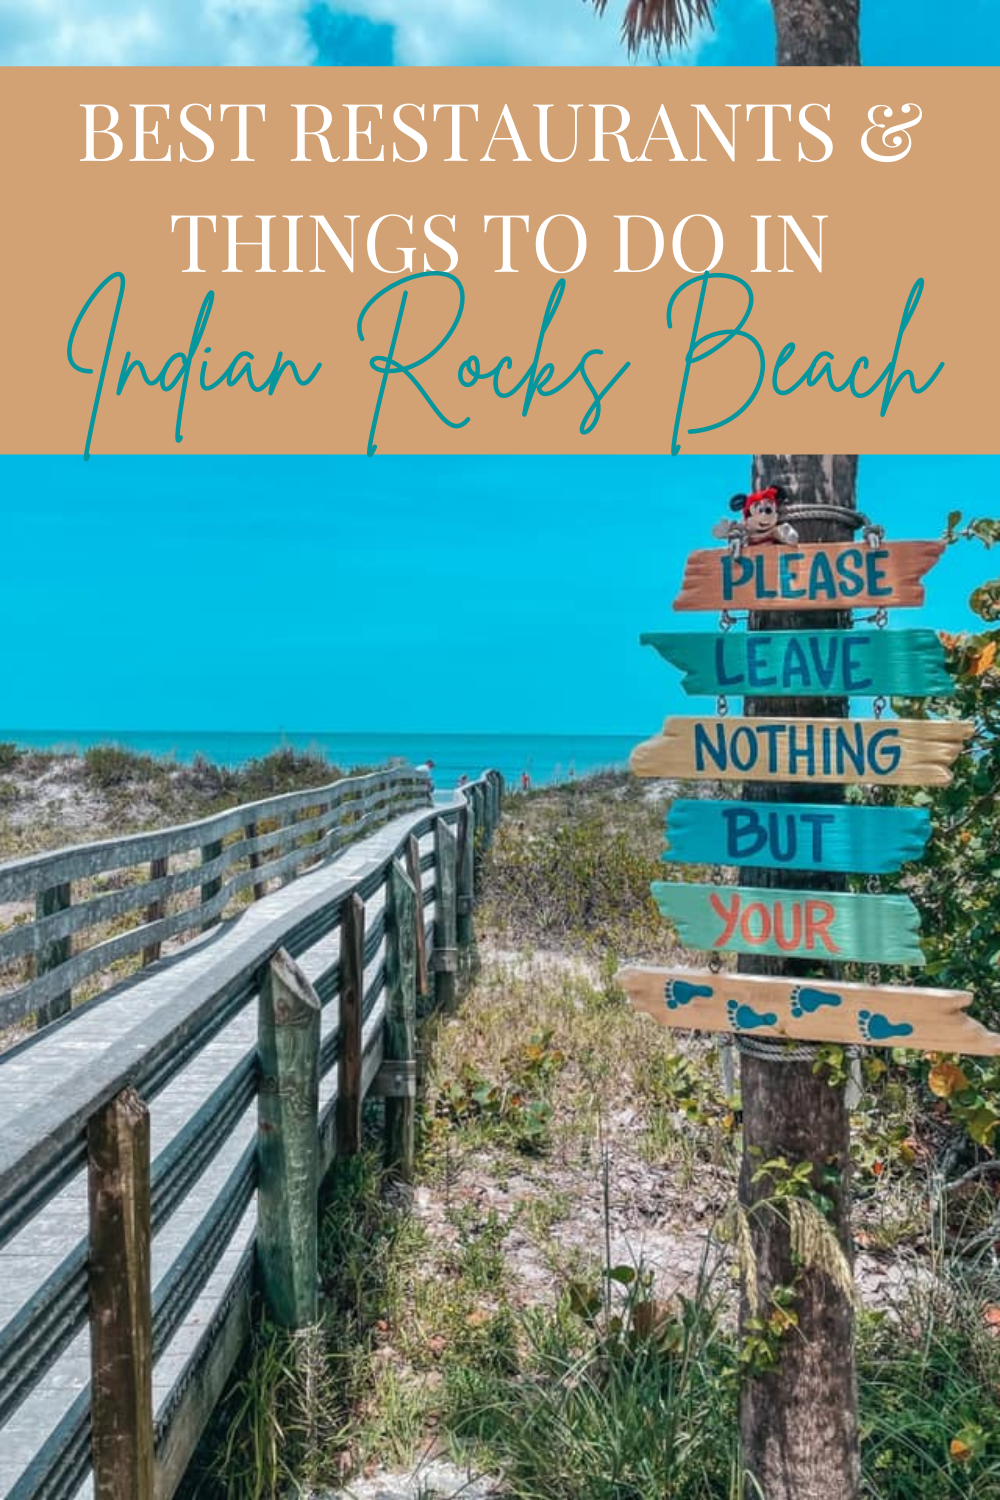 restaurants and things to do in Indian Rocks Beach